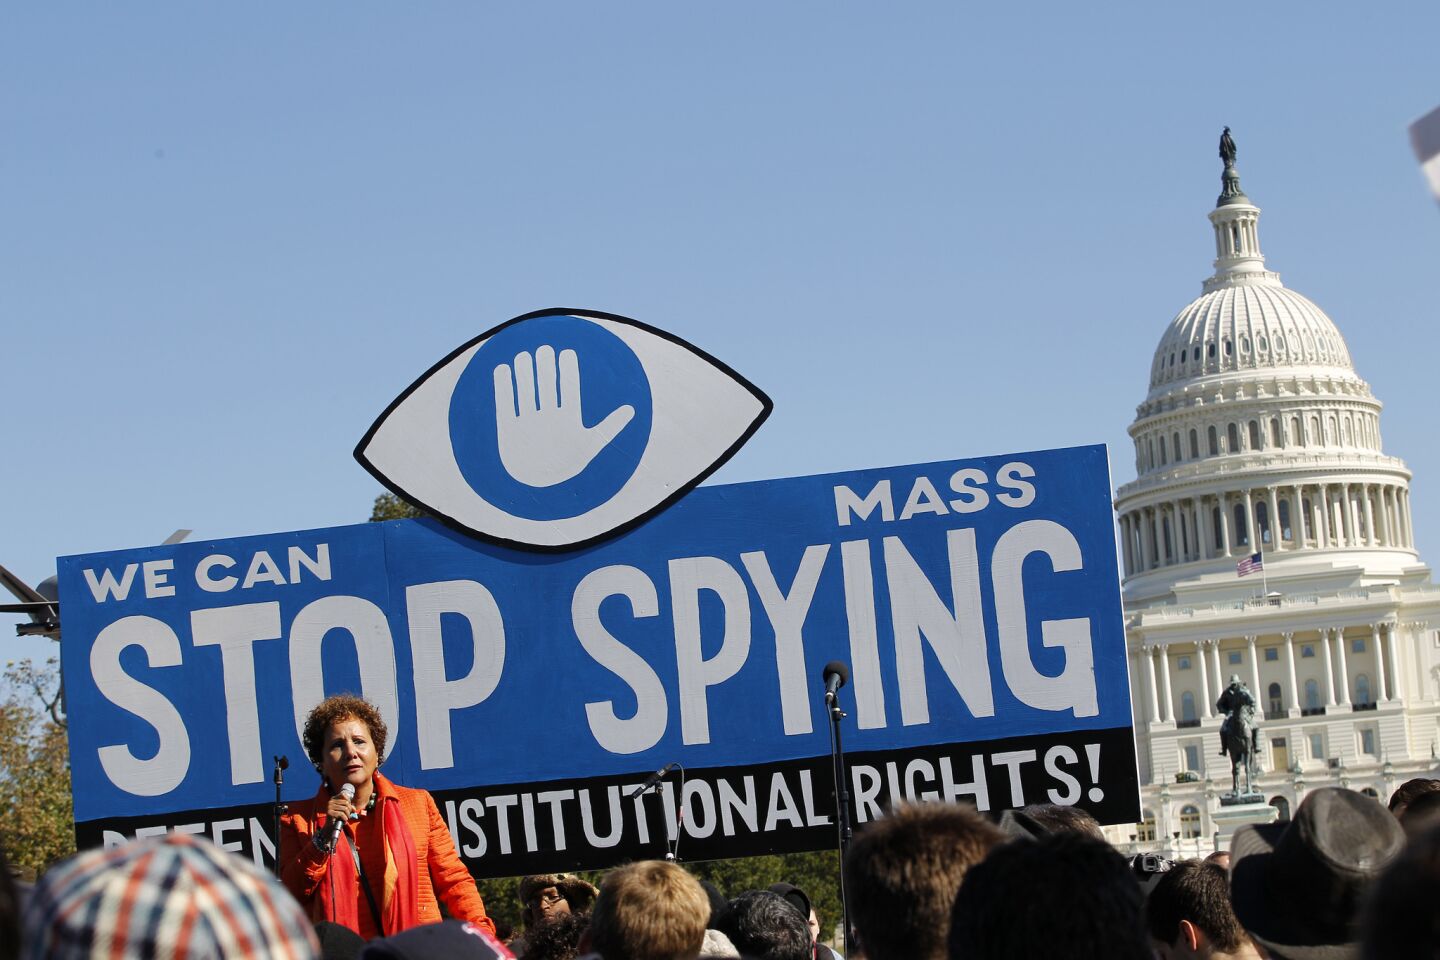 'We can stop mass spying'